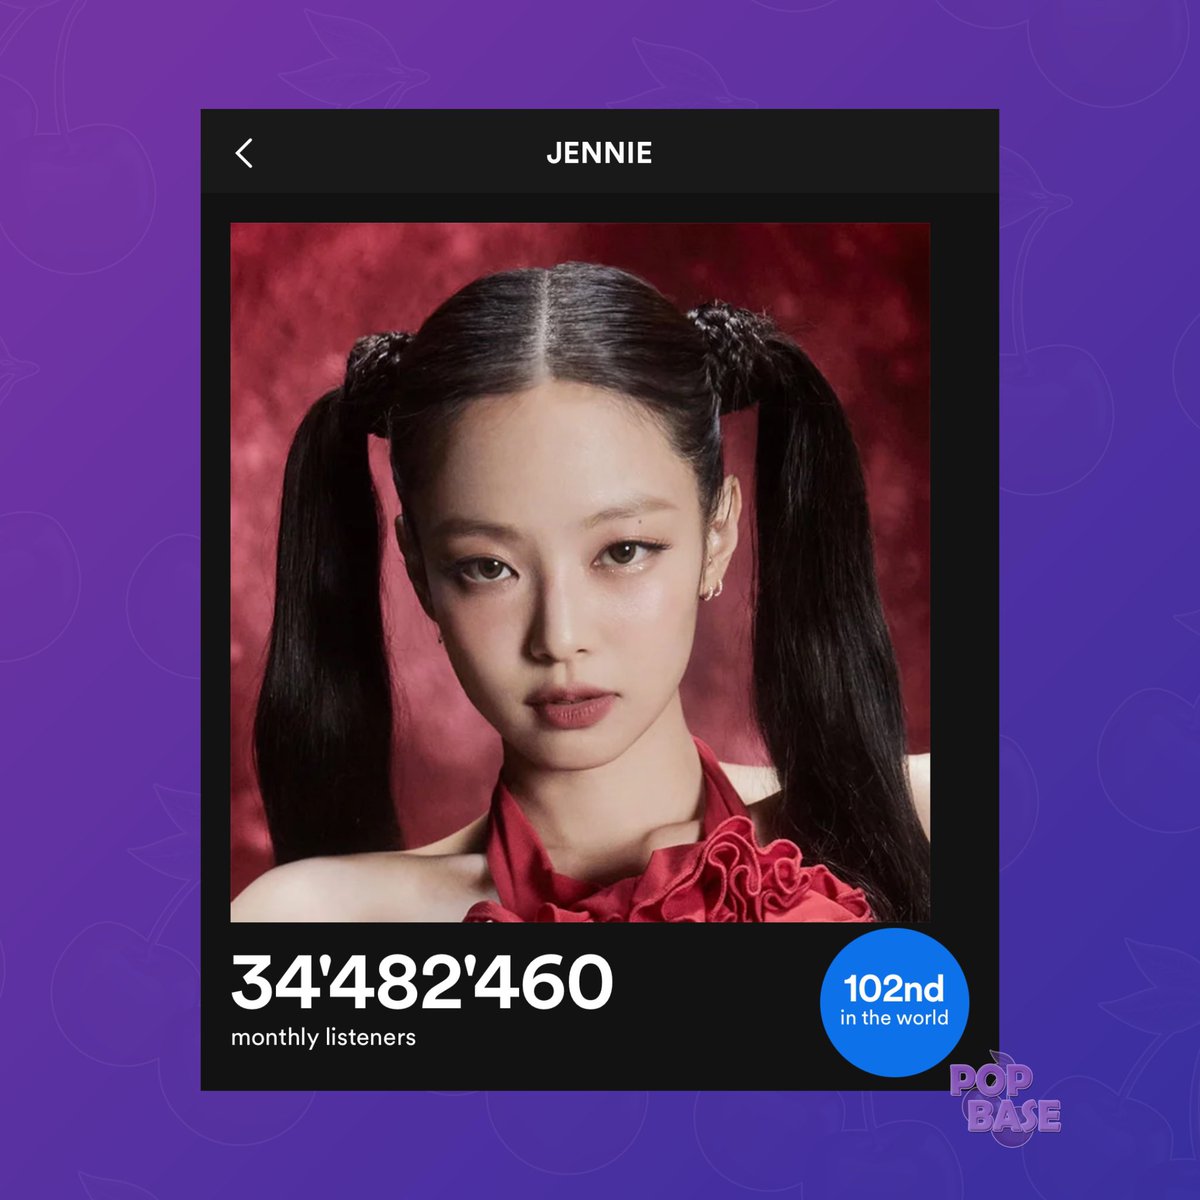 BLACKPINK's Jennie is now the K-Pop artist with the most monthly listeners on Spotify currently. (34.4M)